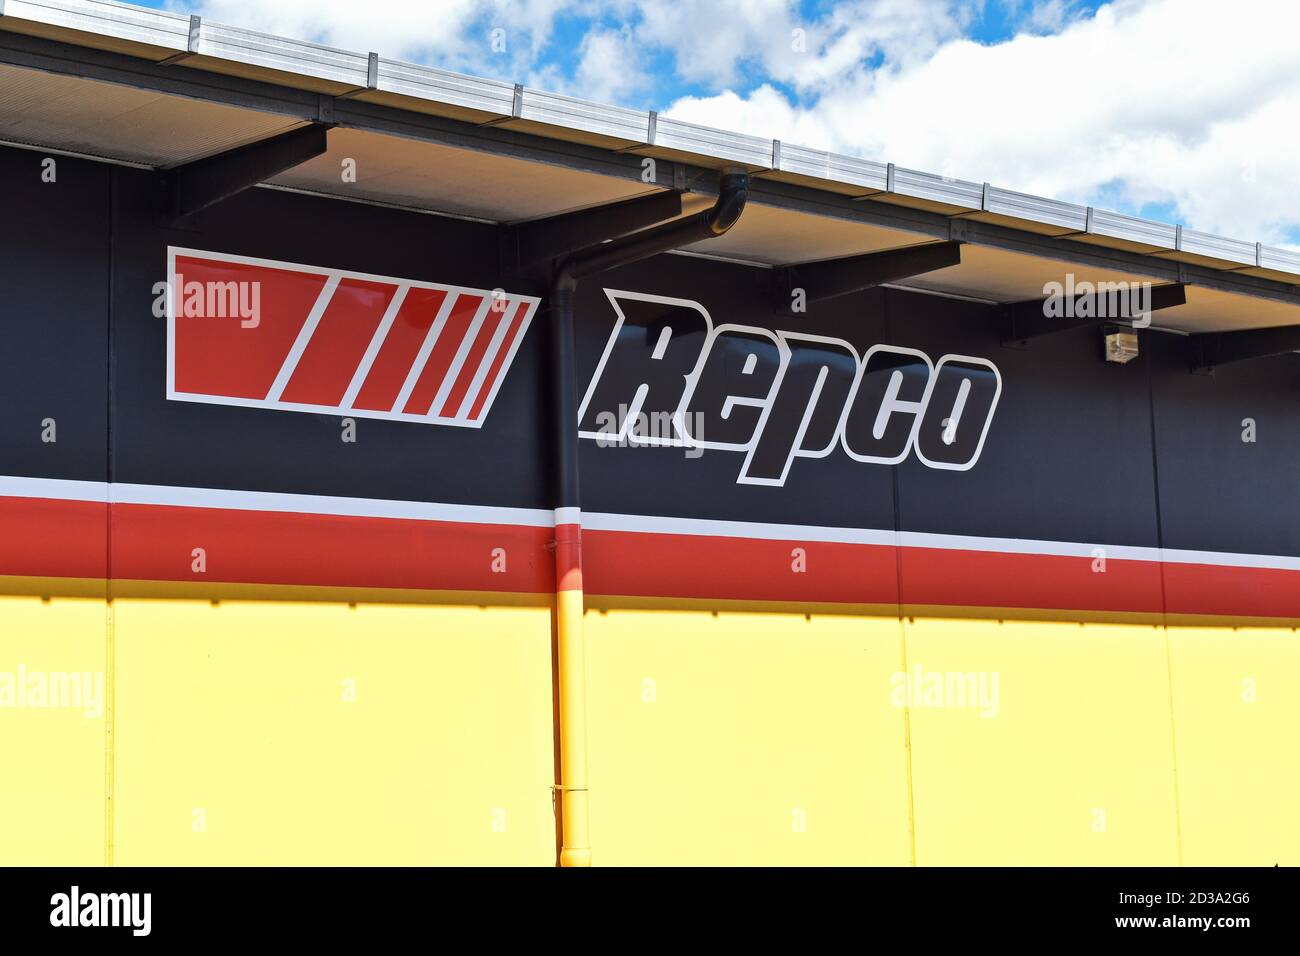 AUCKLAND, NEW ZEALAND - Mar 01, 2019: Auckland / New Zealand - March 21 2019: Repco reseller and supplier of automotive parts Stock Photo